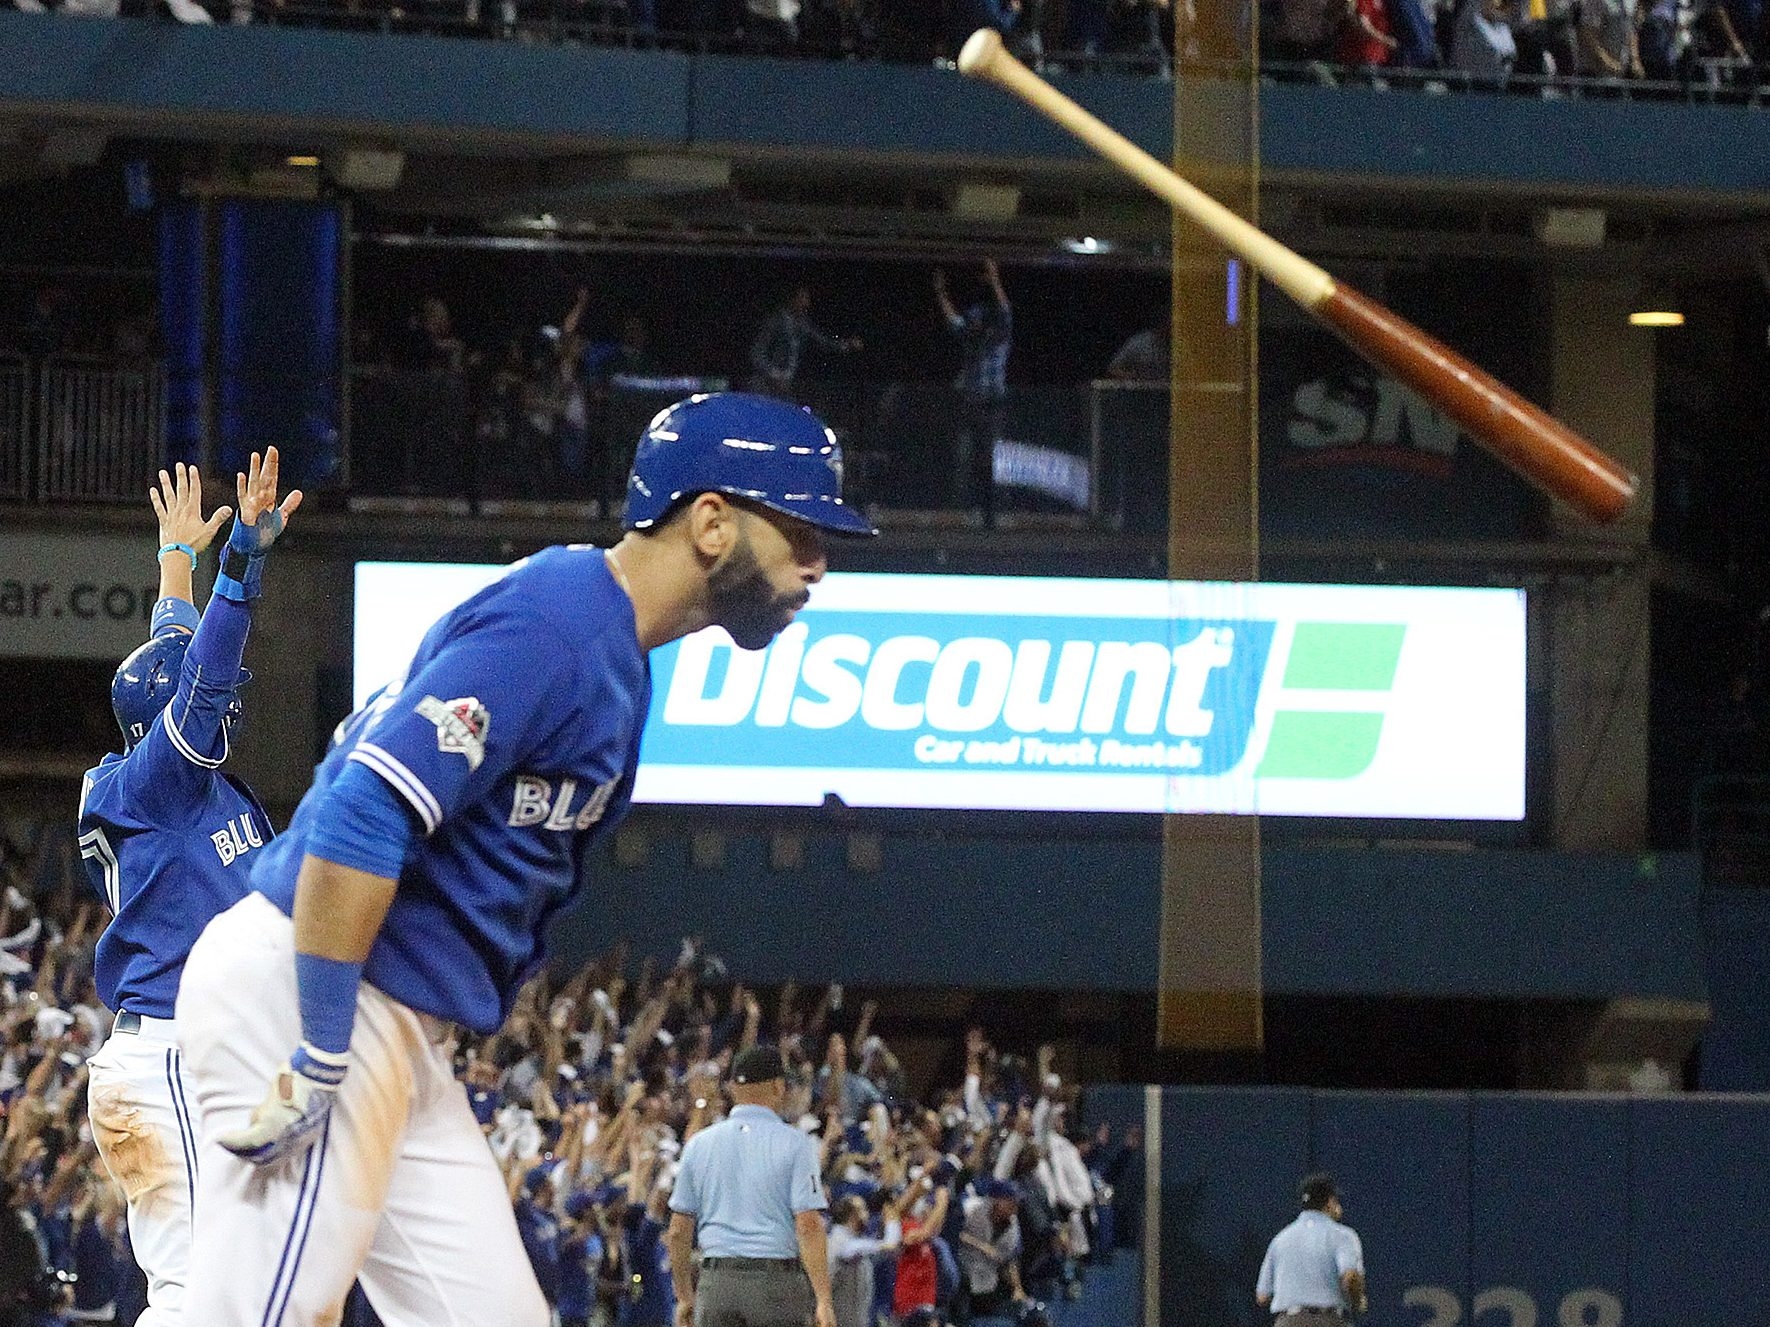 Former big league slugger José Bautista signs one-day contract to retire  with Blue Jays